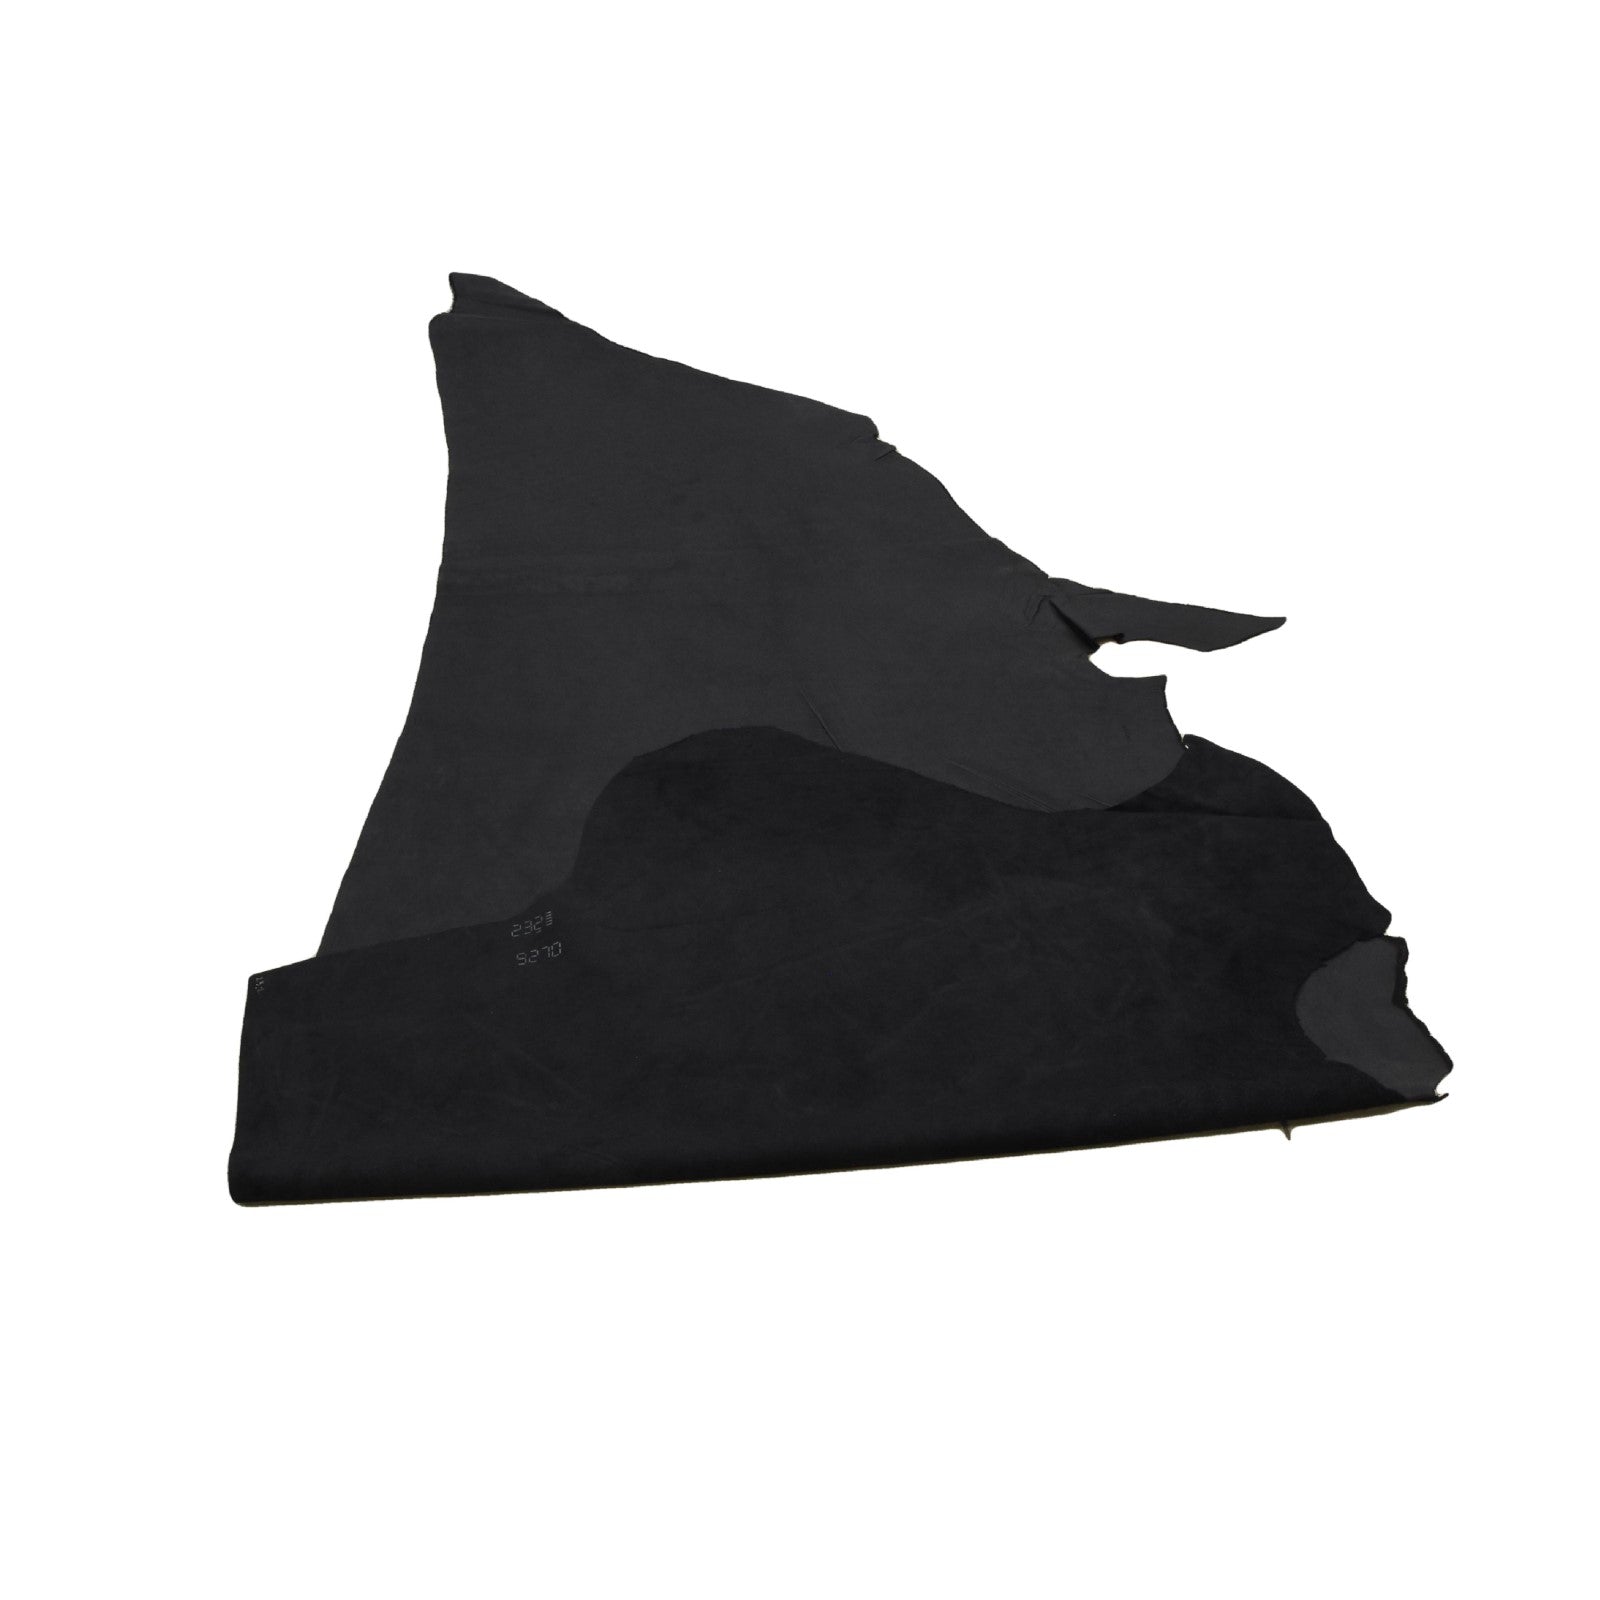 Conquest Black Oil Tanned Cowhide Sides 2 1/2 oz Flat Grain,  | The Leather Guy